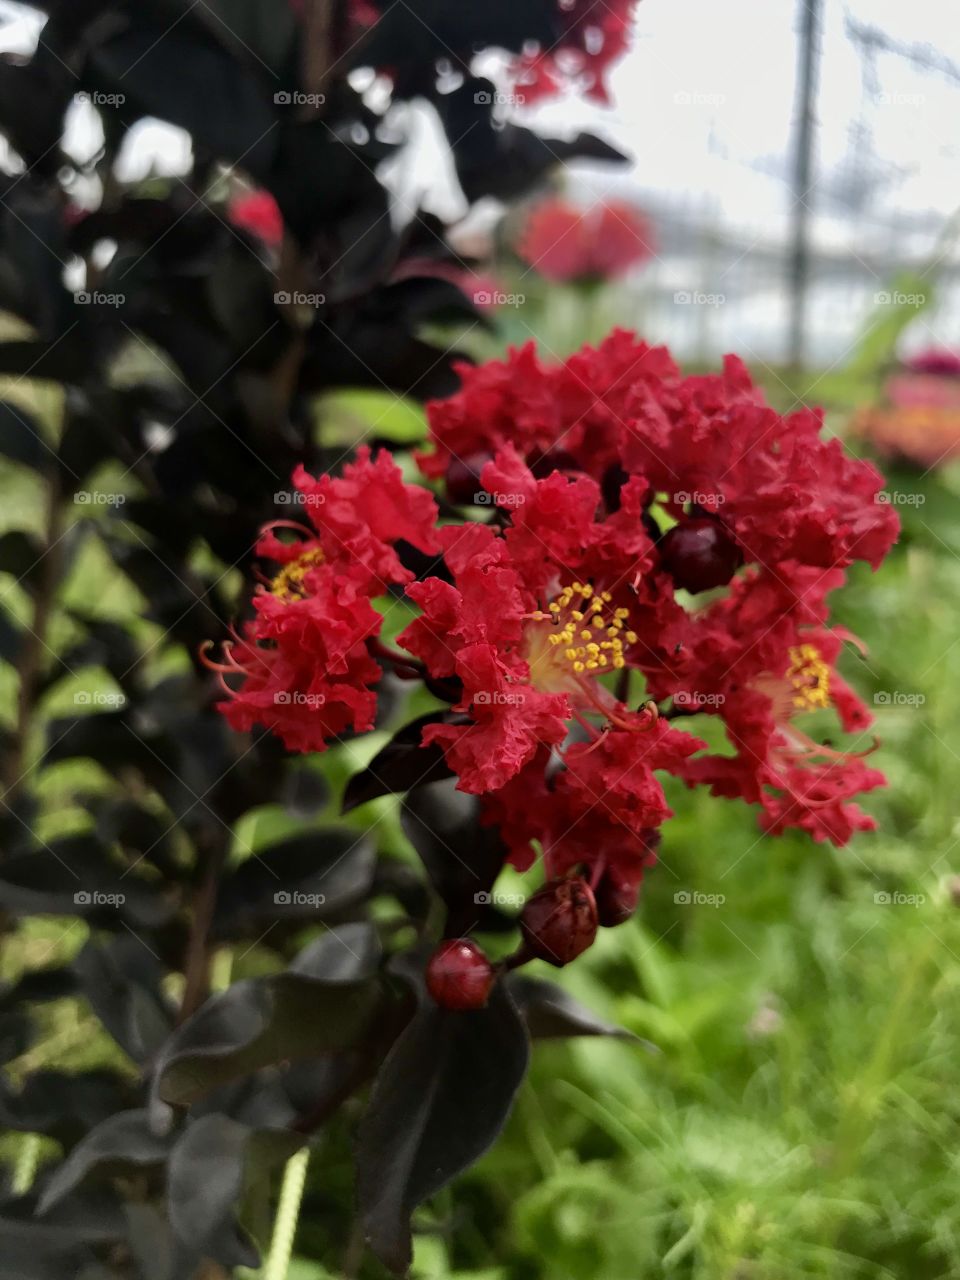 The Queen of the Garden. Red-flowering, Black-leaved Crape Myrtle quietly reigns supreme in this corner of the garden.